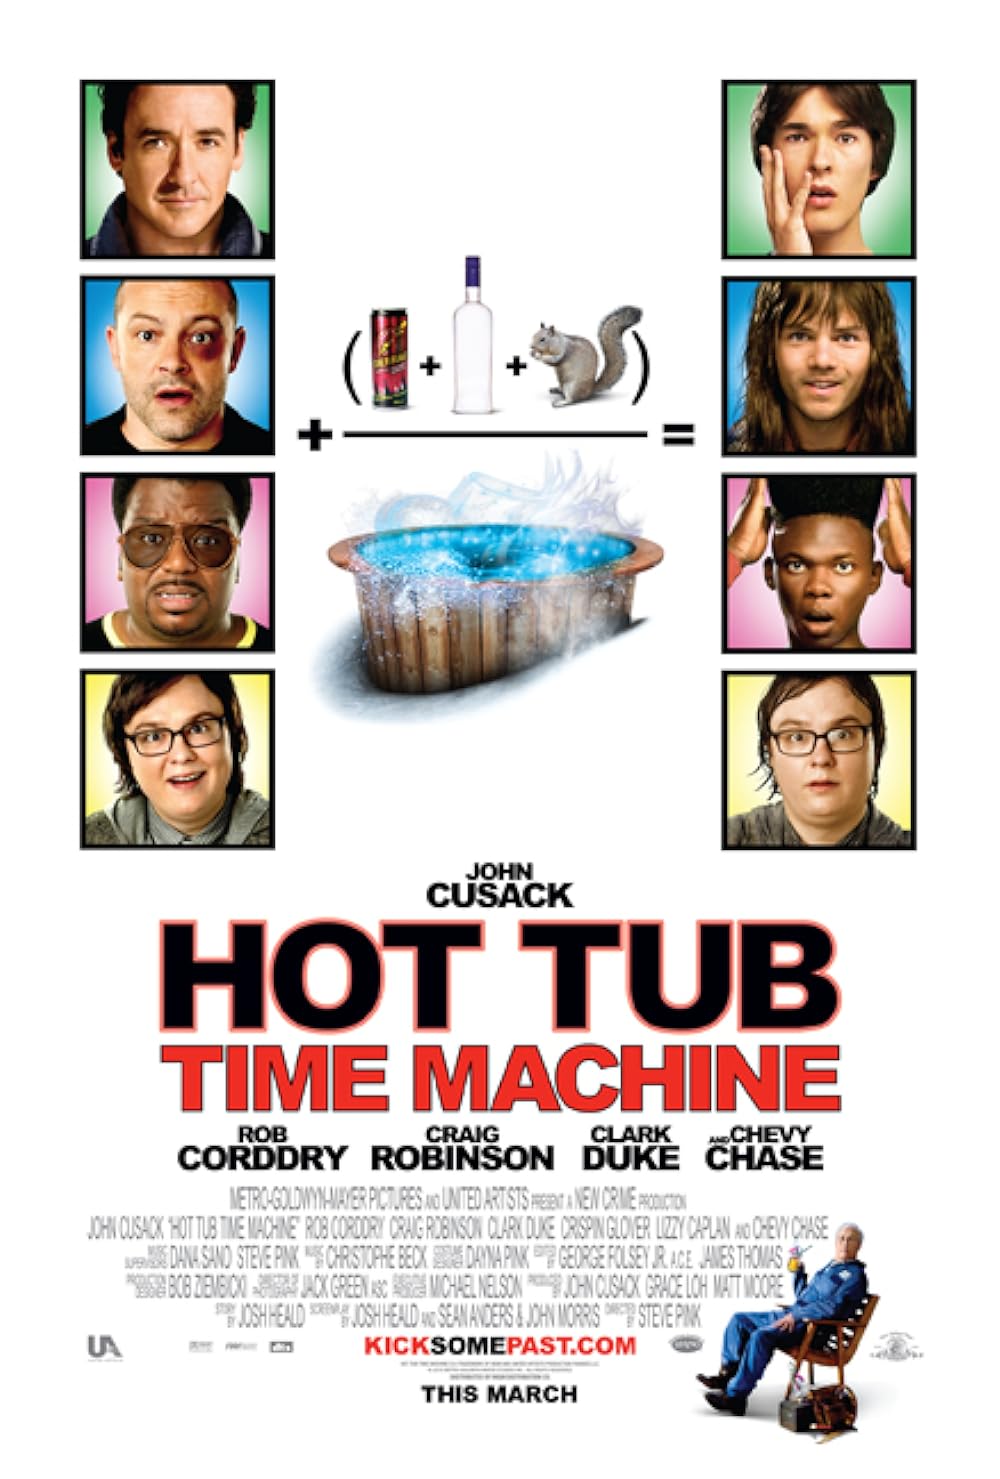 andrew gotham recommends hot tub time machine sex scenes pic